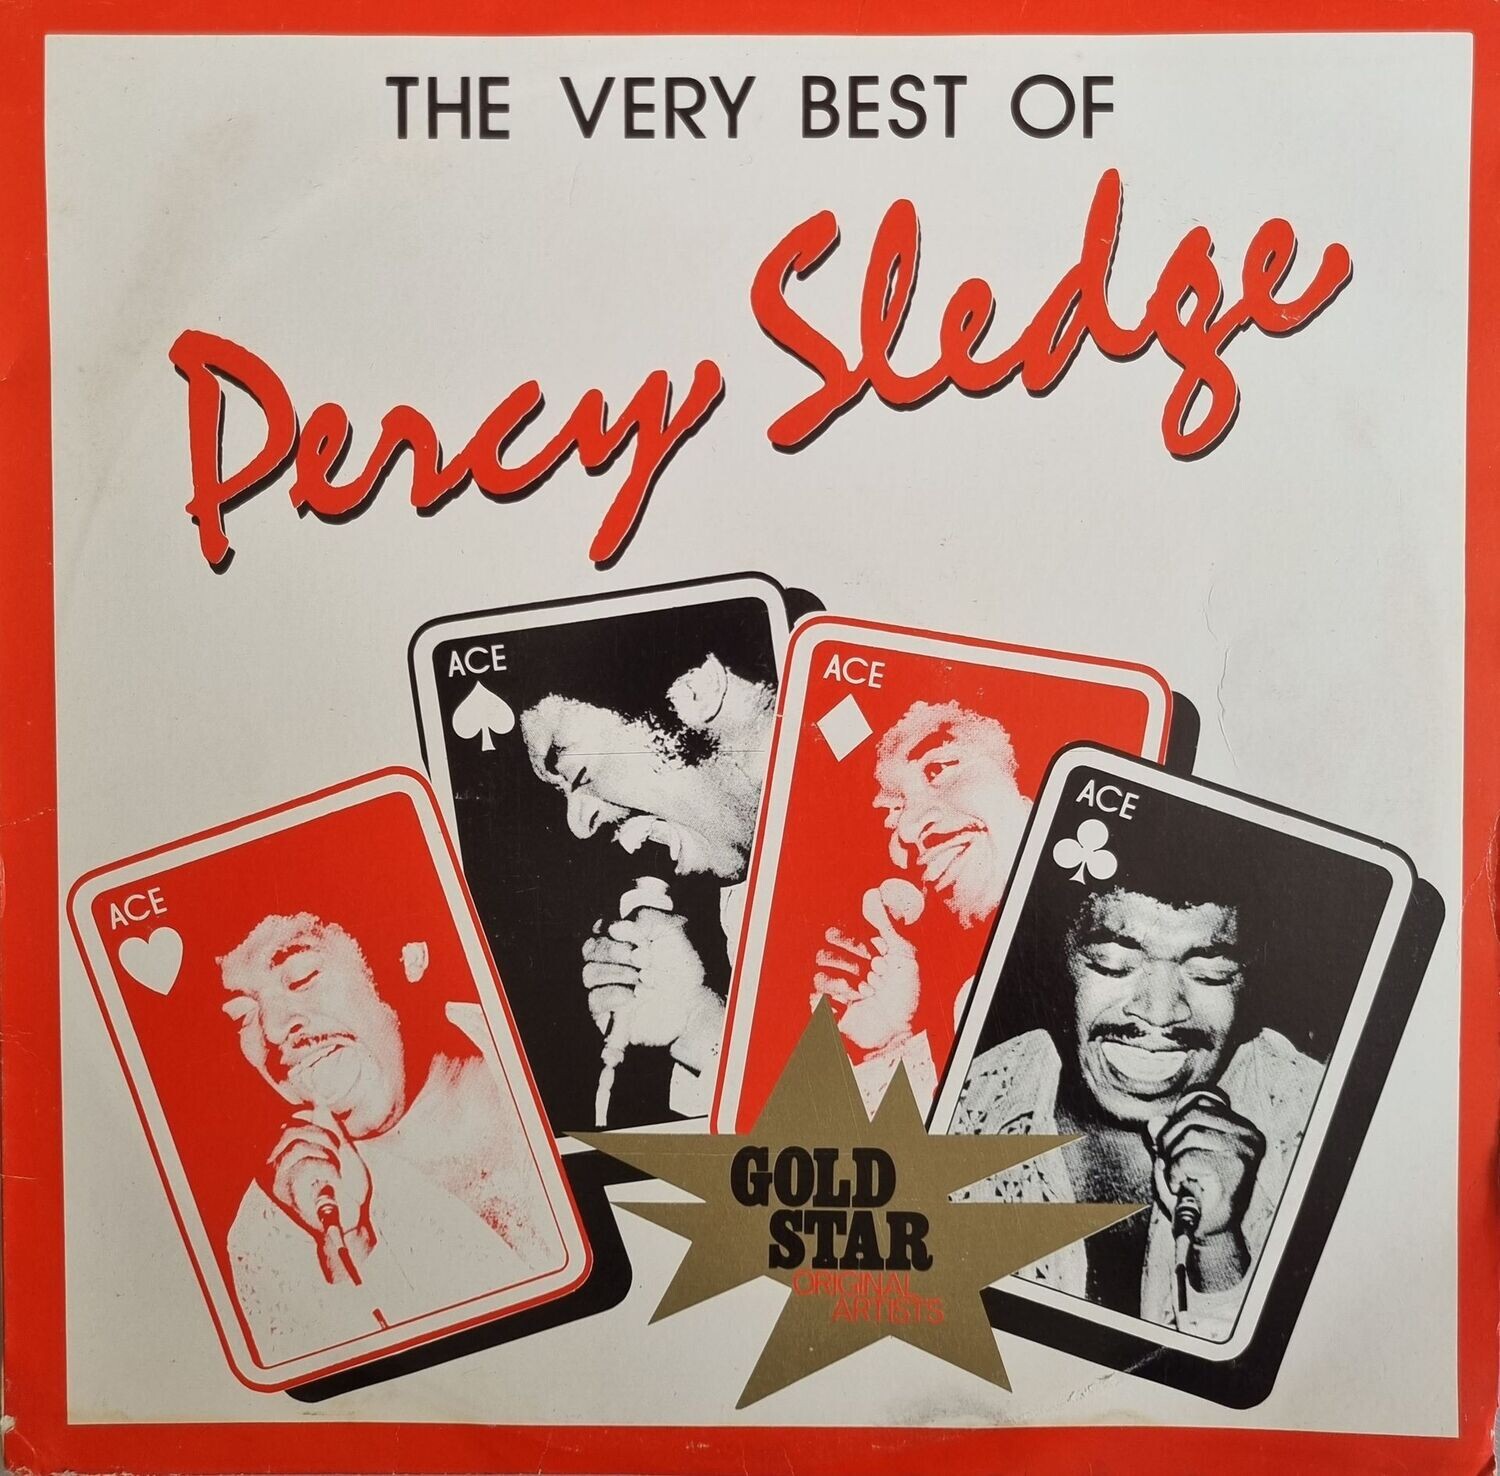 Percy Sledge – The Very Best of (1984)